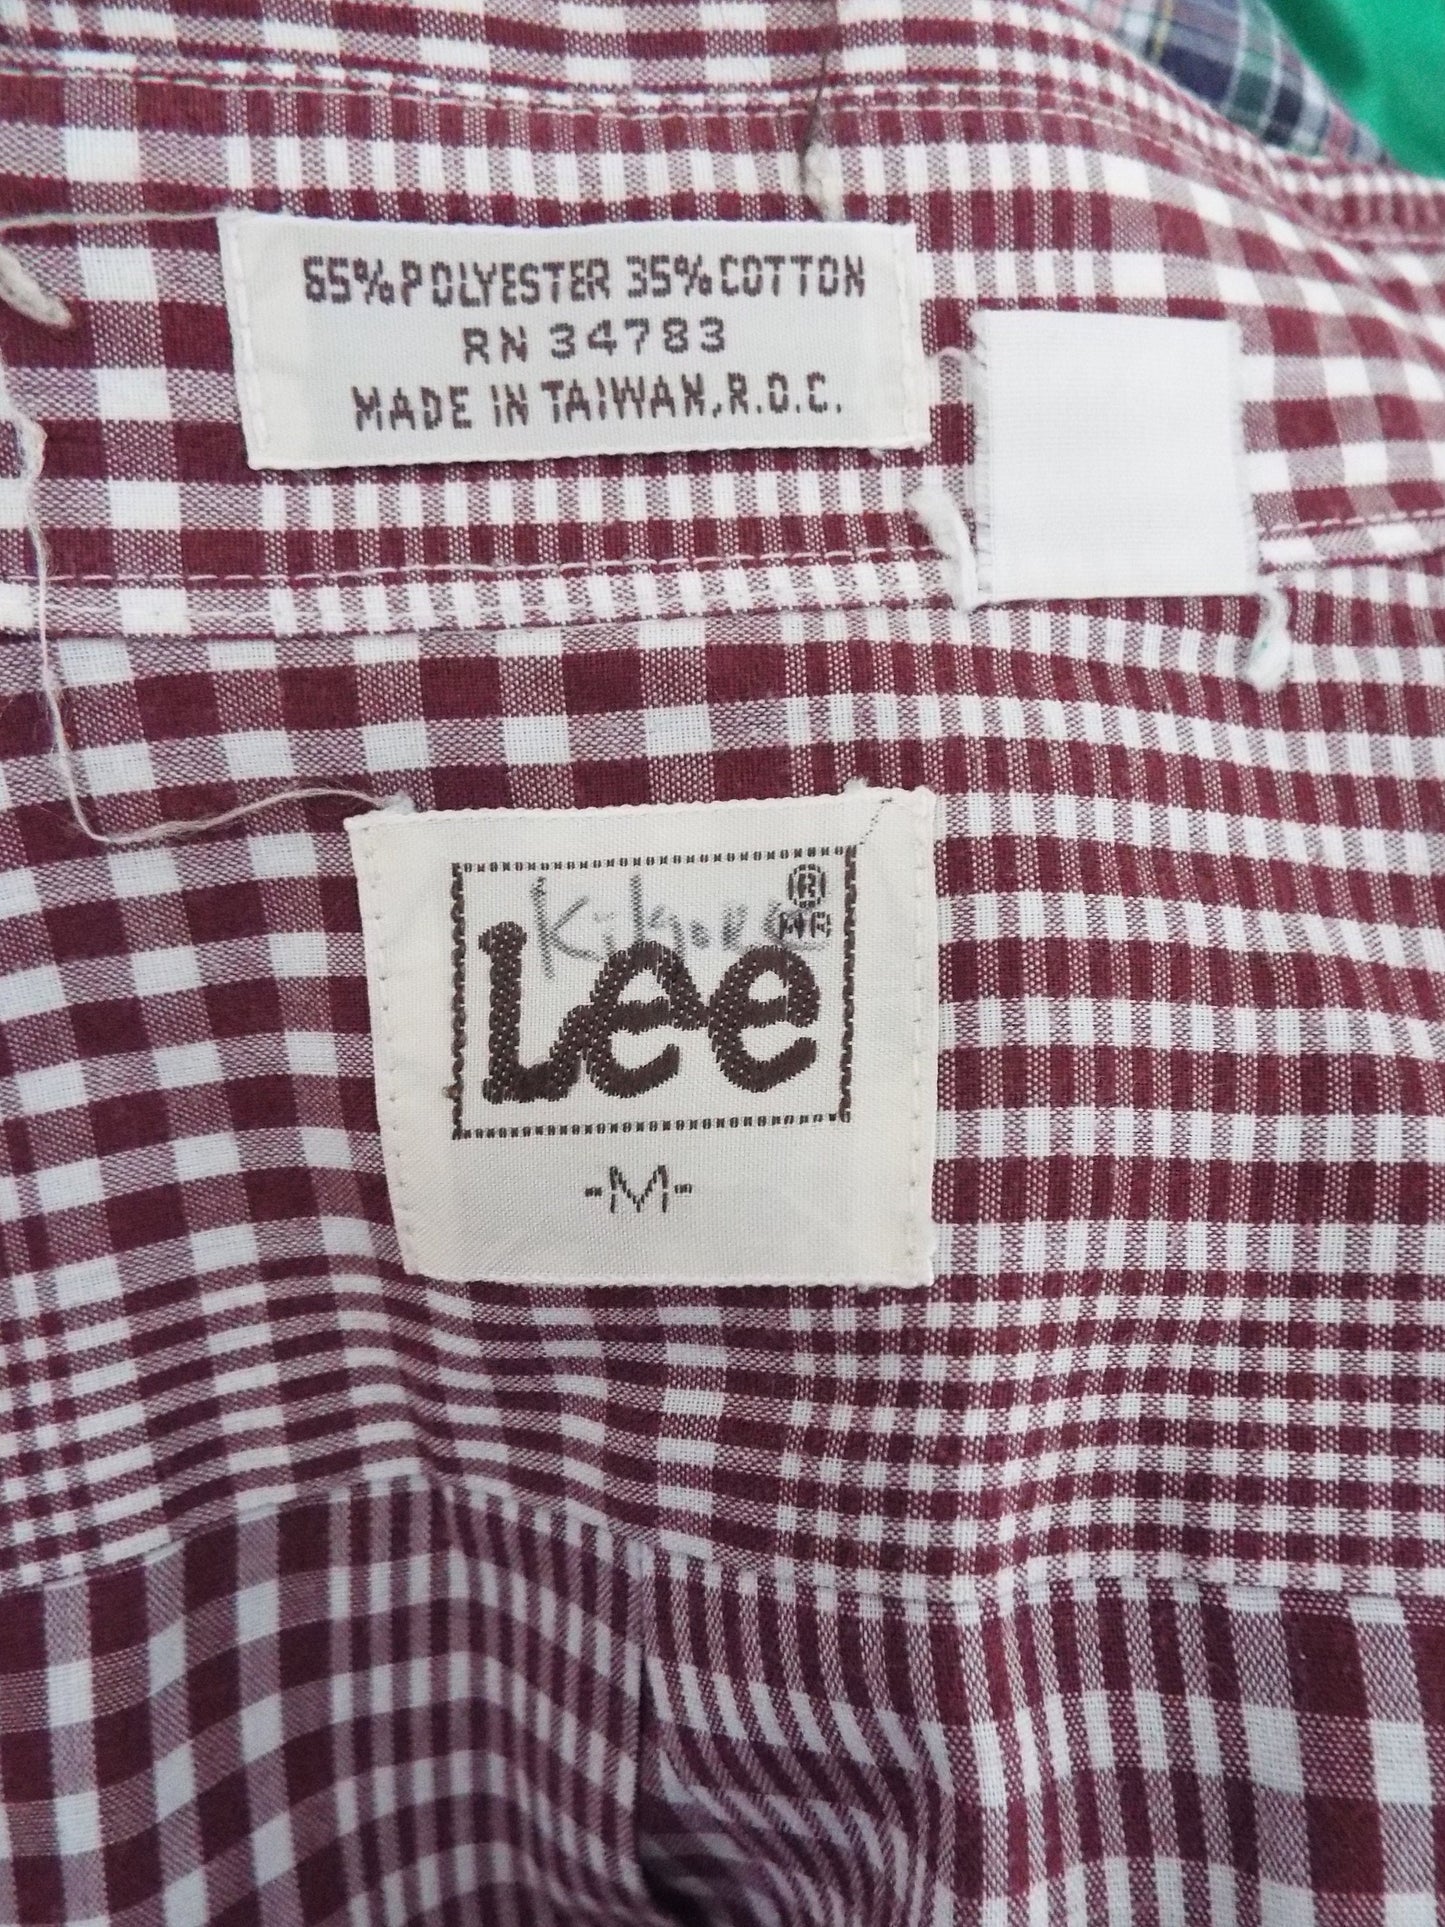 Vintage Long Sleeve Button Down Plaid Shirt by Lee